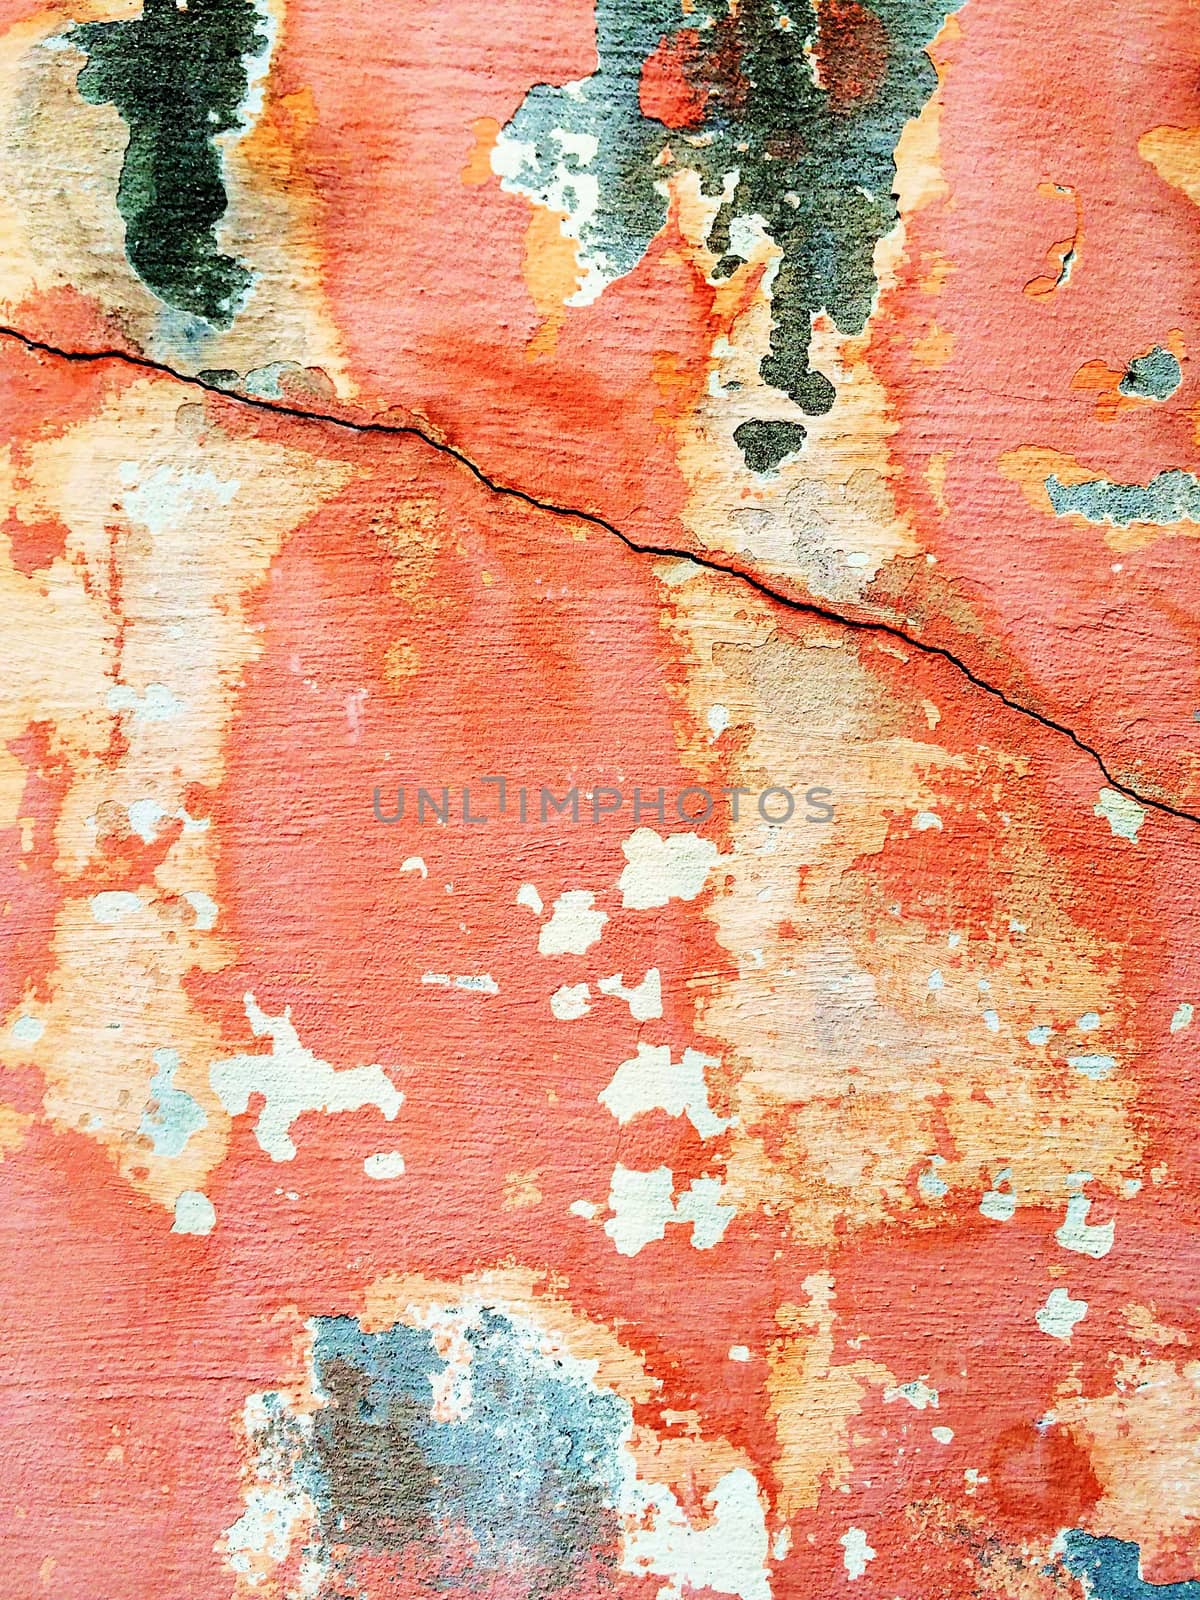 Bright cracked red wall with old peeling paint.